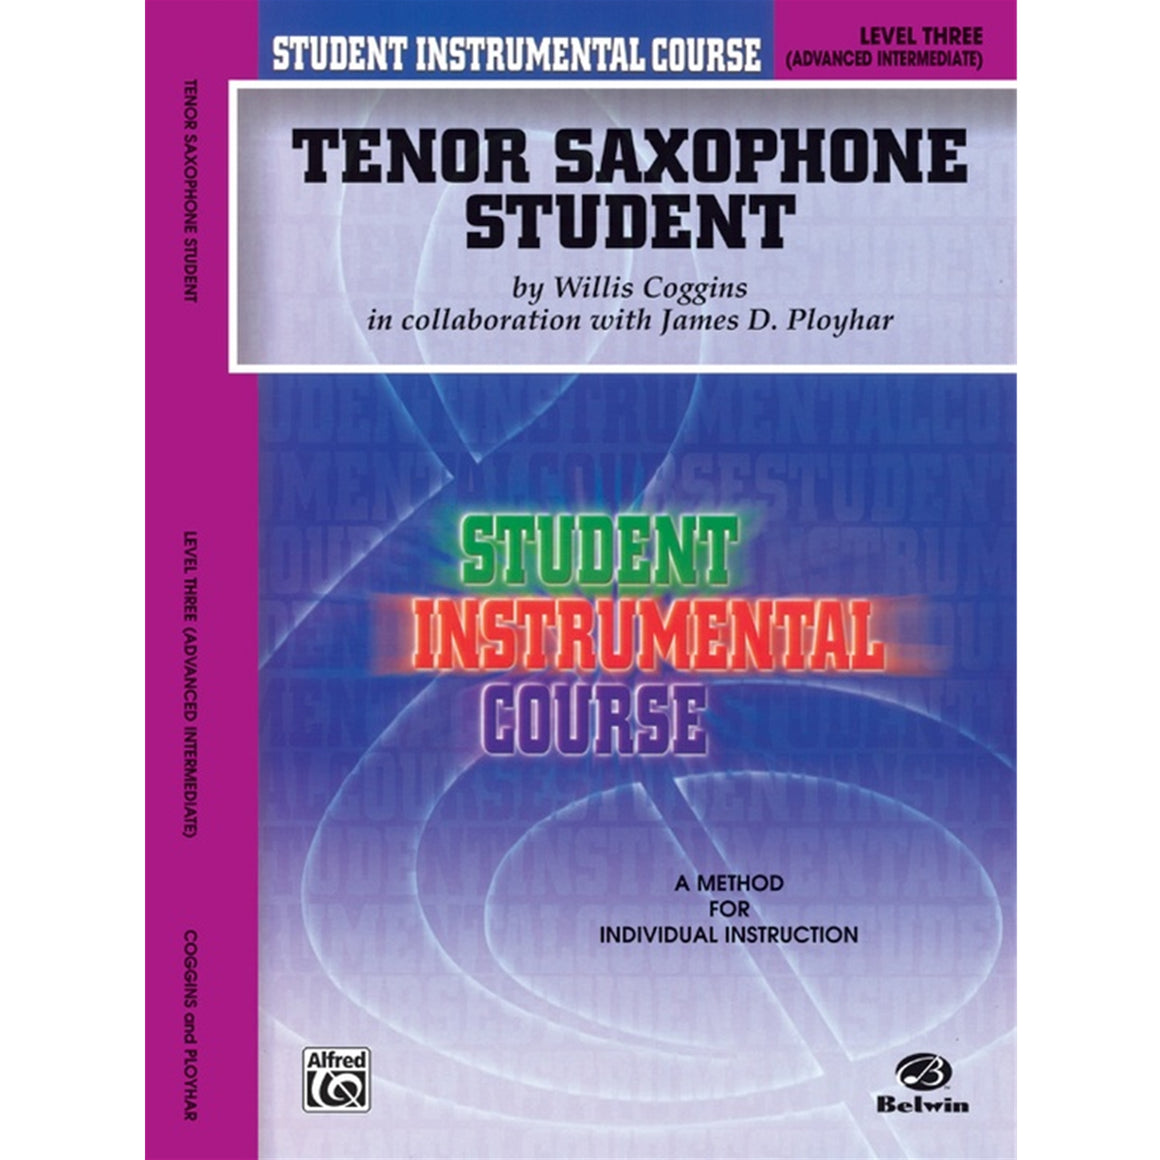 ALFRED 00BIC00336A Student Instrumental Course: Tenor Saxophone Student, Level III [Saxophone]